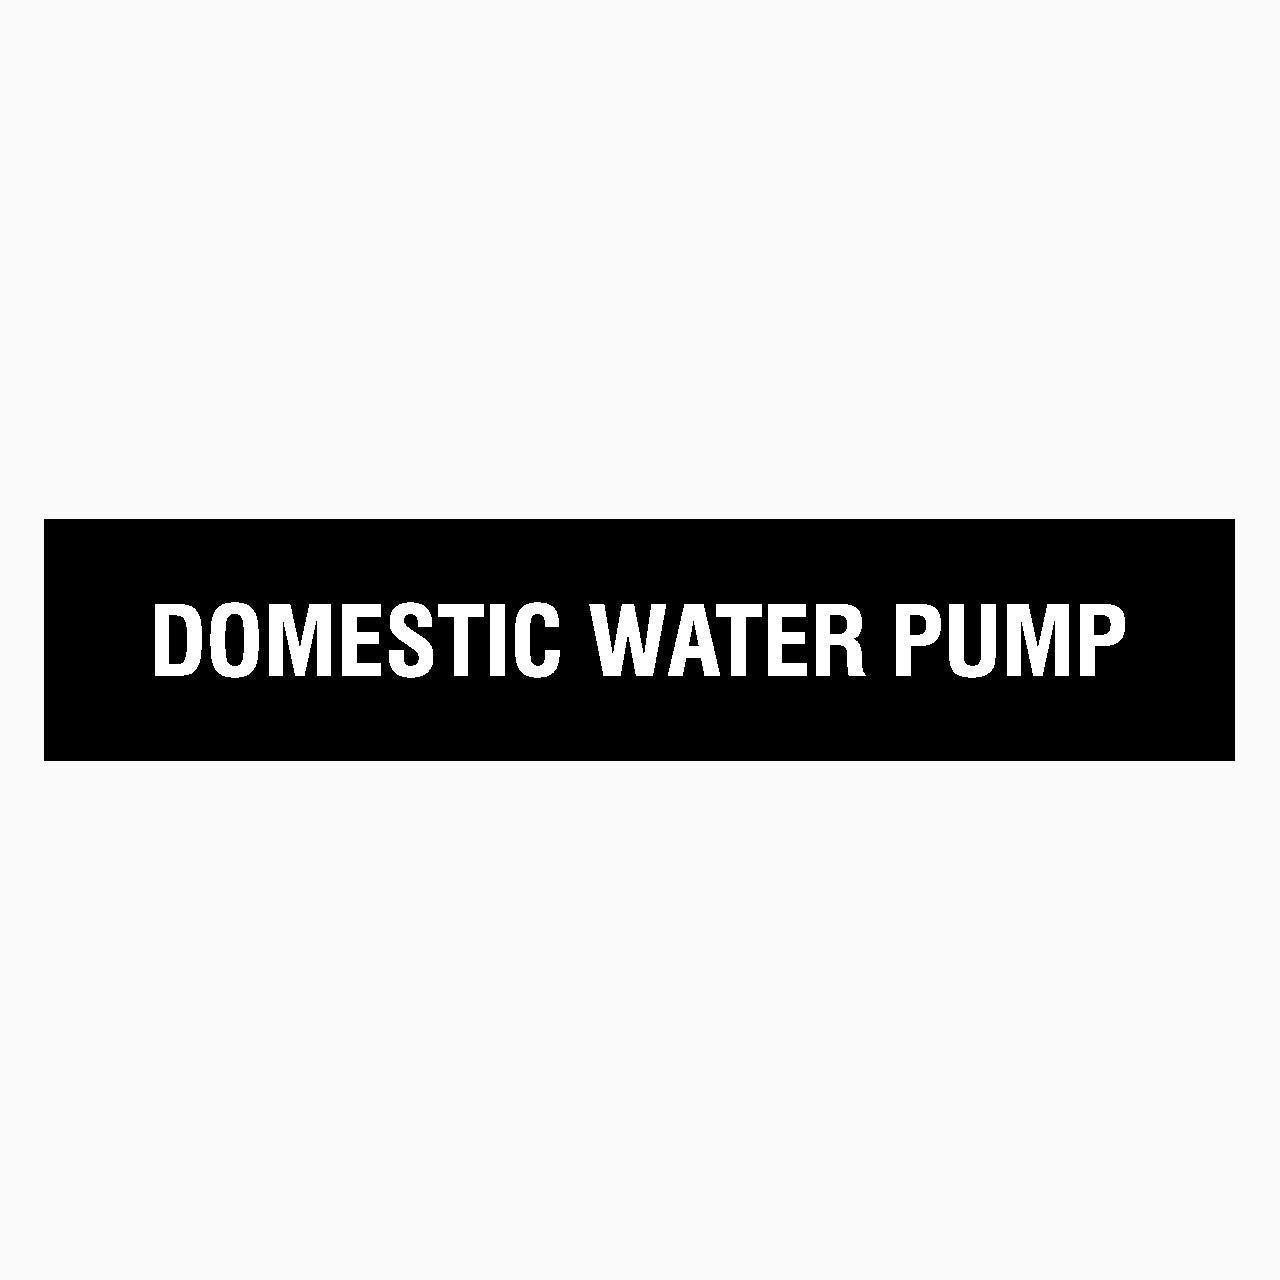 DOMESTIC WATER PUMP SIGN